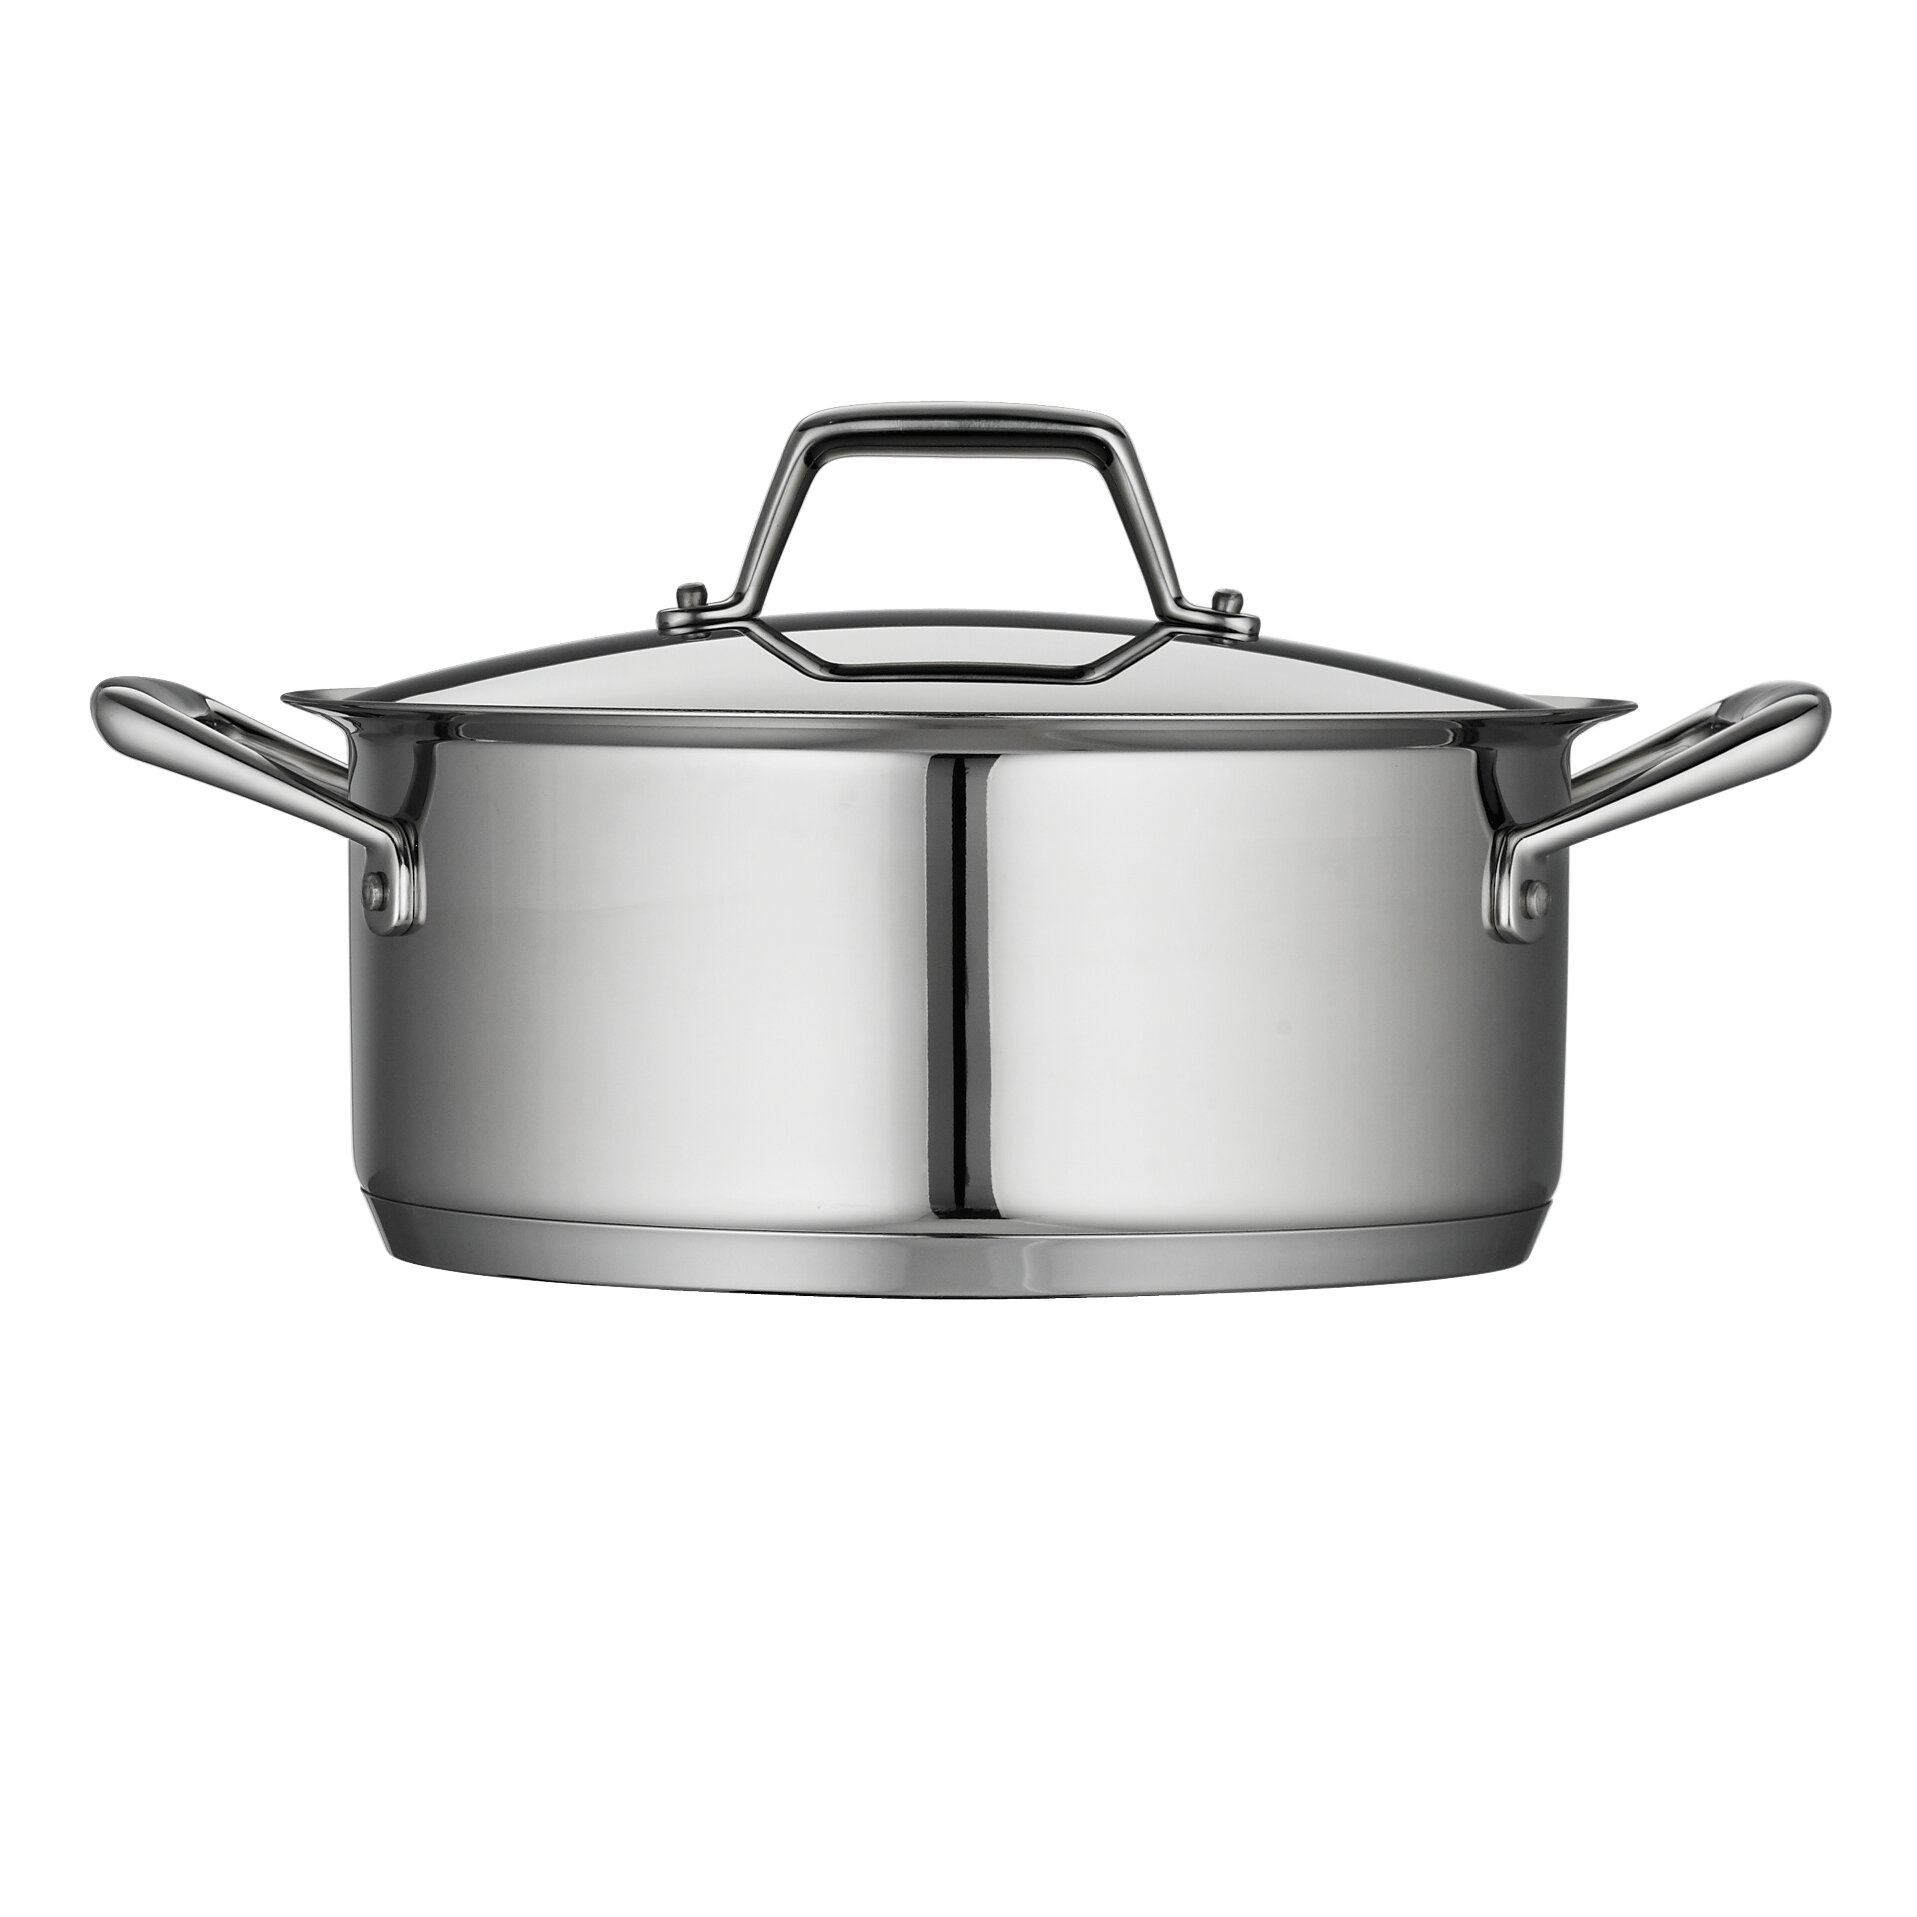 Tramontina Gourmet Tri-Ply Clad 5 Quarts Stainless Steel Round Dutch Oven &  Reviews